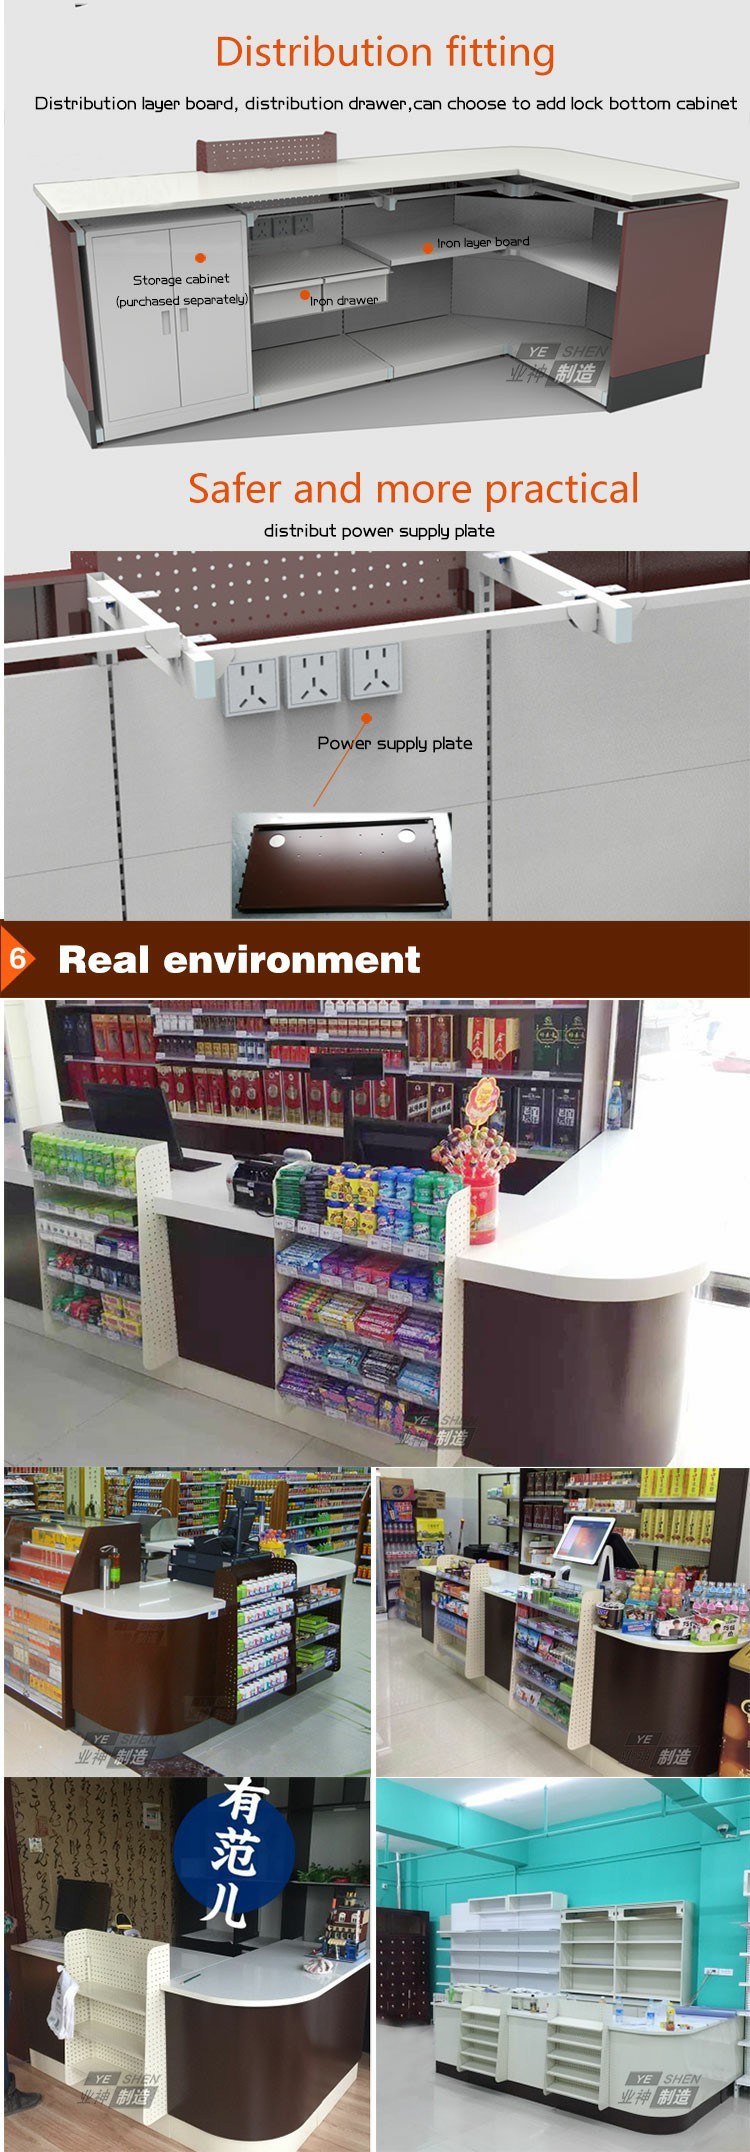 Factory Sale Steel Retail Checkout Counter Display for Shop